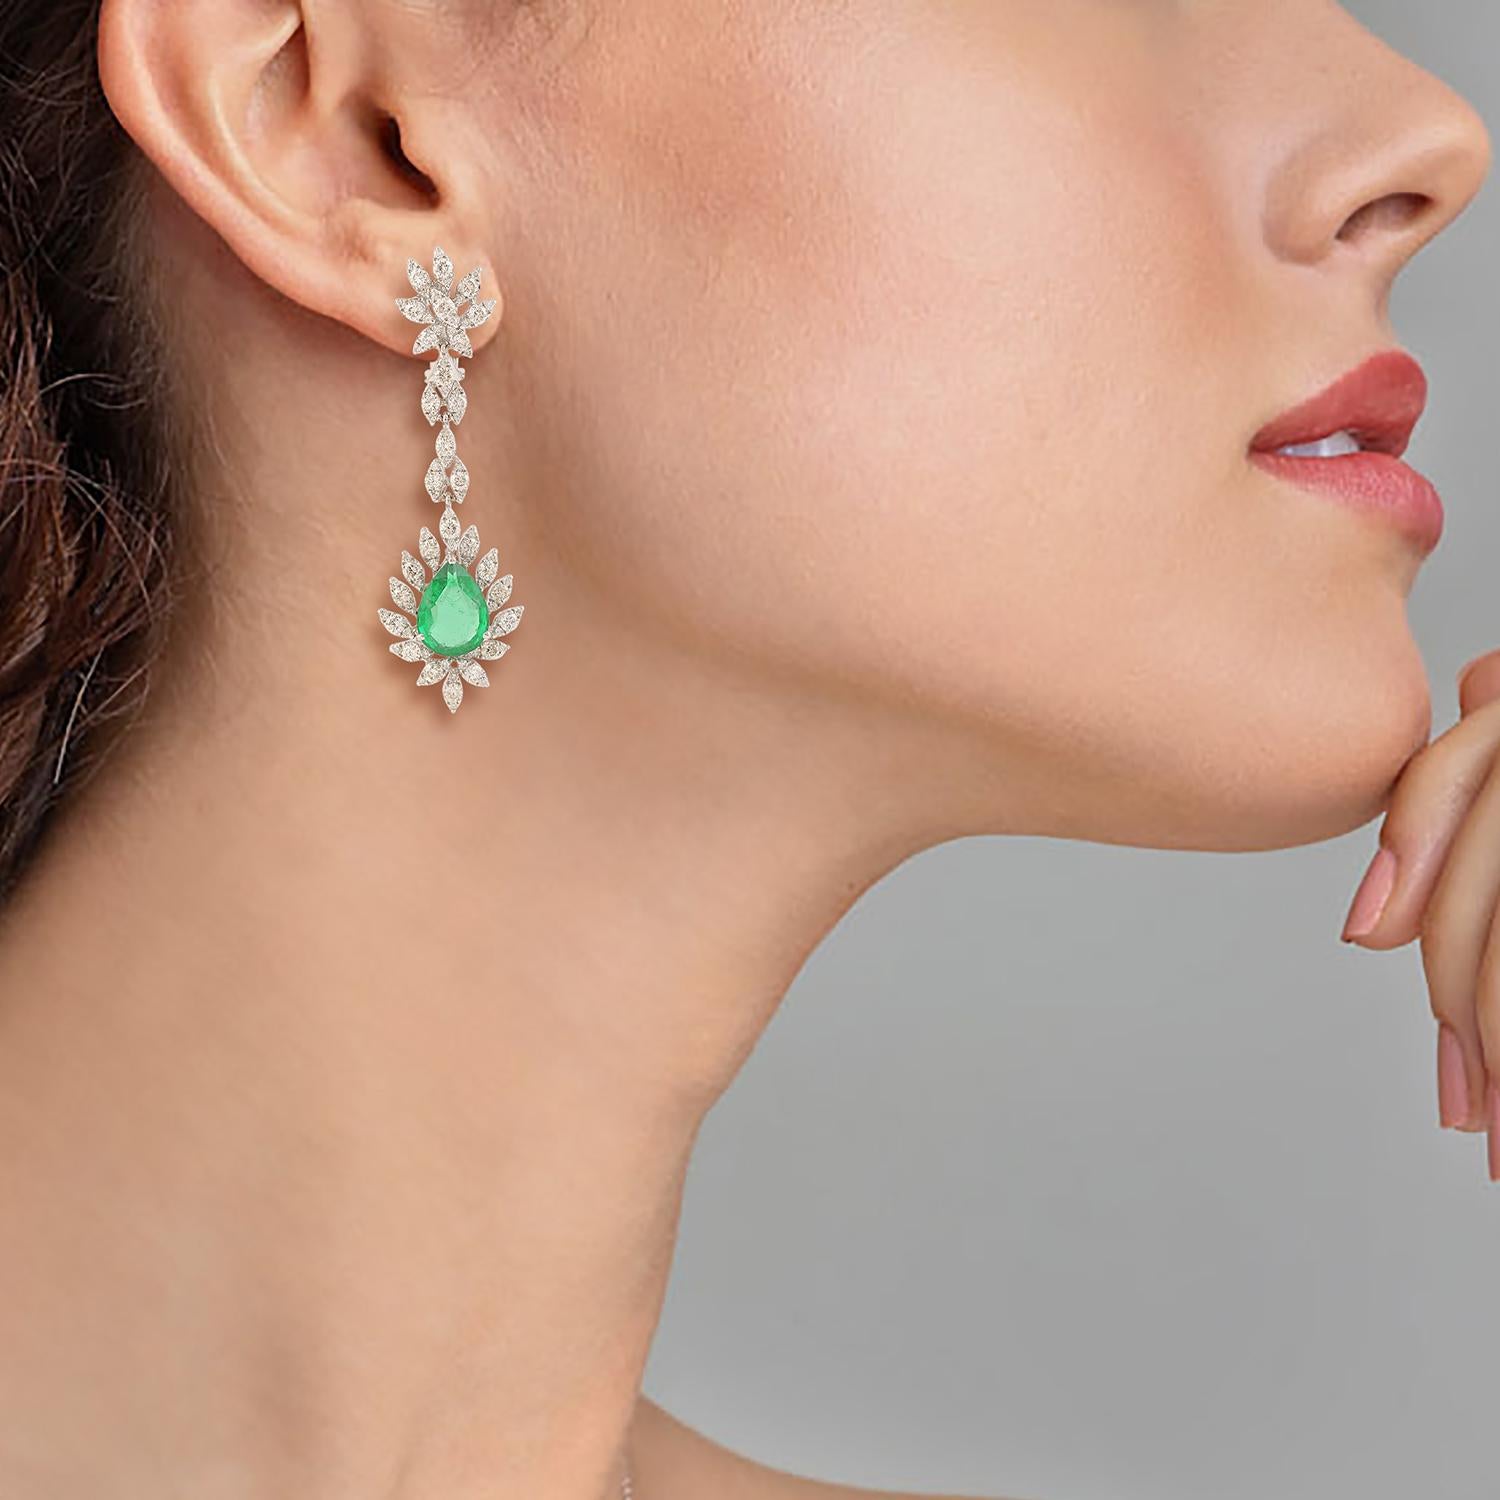 Cast in 14 karat gold, these exquisite earrings are hand set with 7.16 carats emerald and 3.93 carats of glimmering diamonds. 

FOLLOW MEGHNA JEWELS storefront to view the latest collection & exclusive pieces. Meghna Jewels is proudly rated as a Top